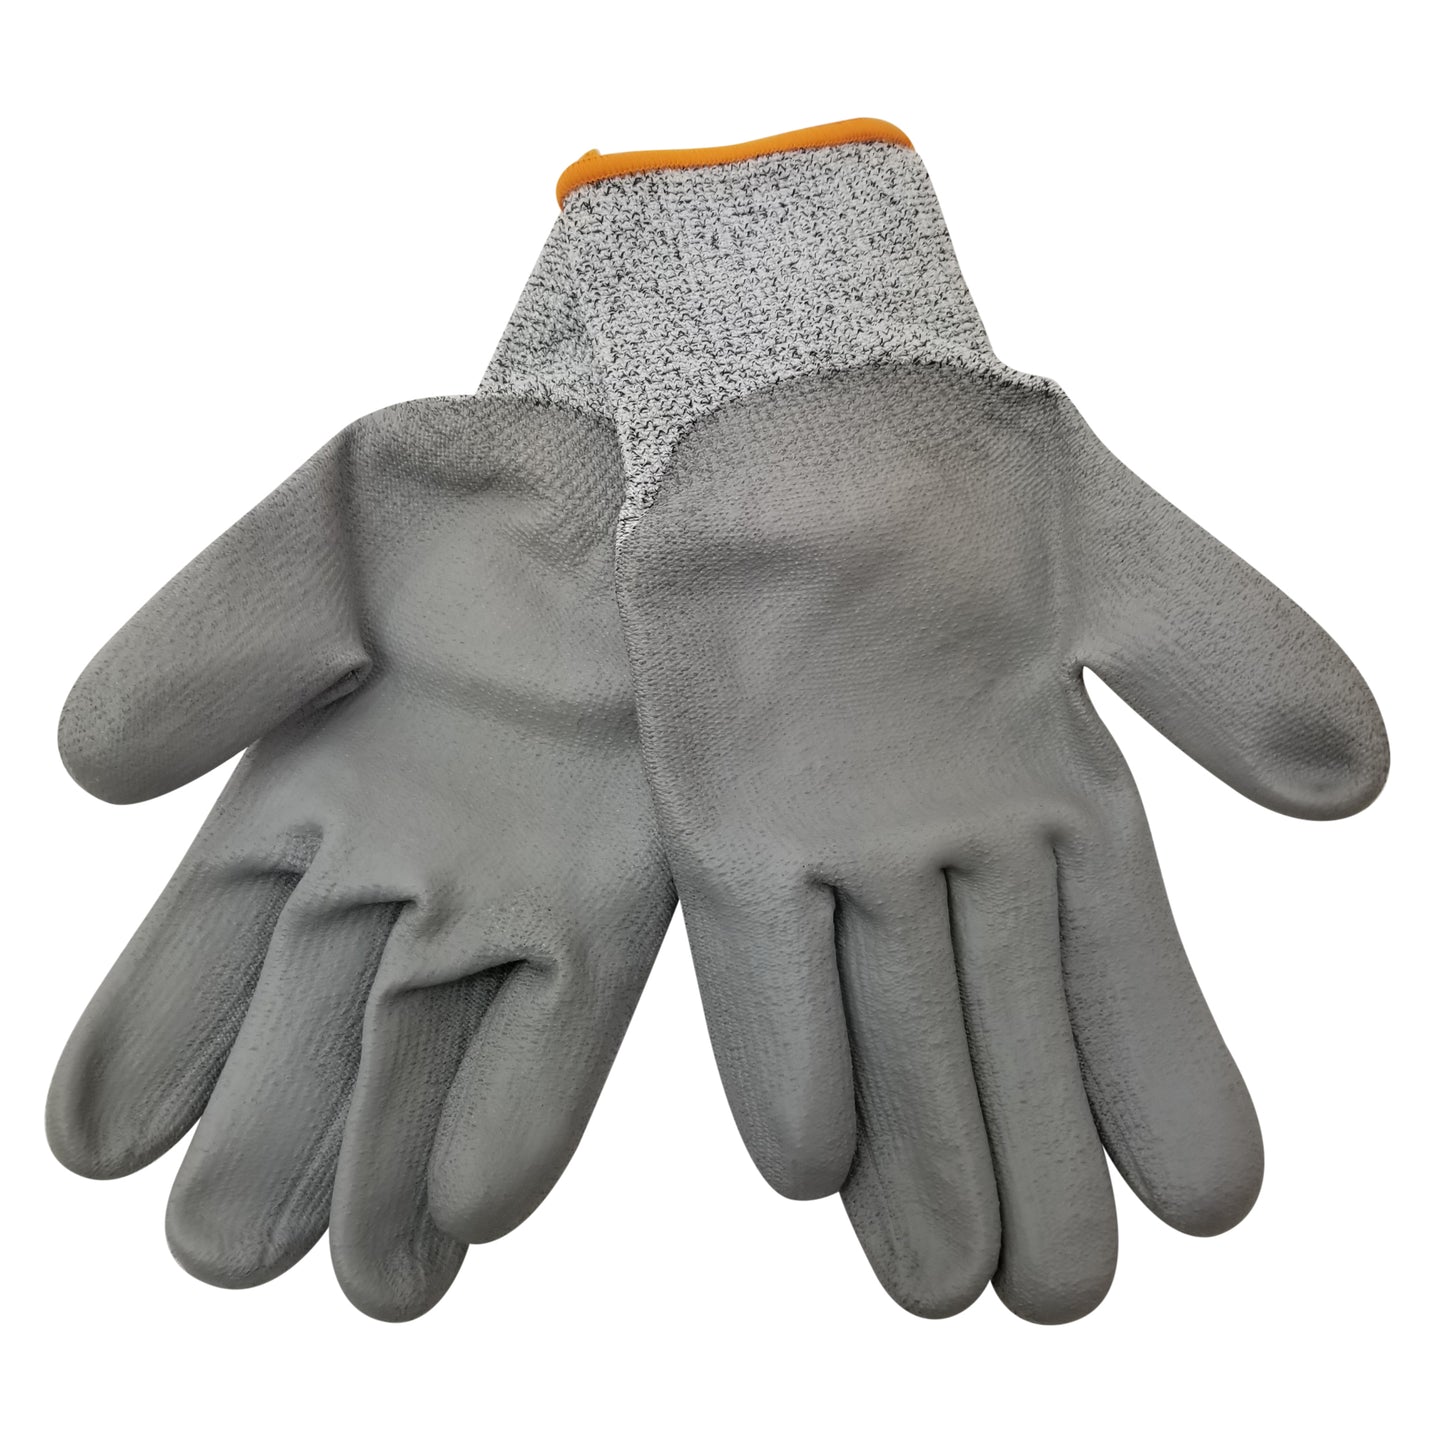 INGCO Cut Resistance Rubber Gloves (XL) HPPE Shell, Abrasion, Antistatic, Tear and Puncture Resistance with PU Coated Palm | HGCG01-XL